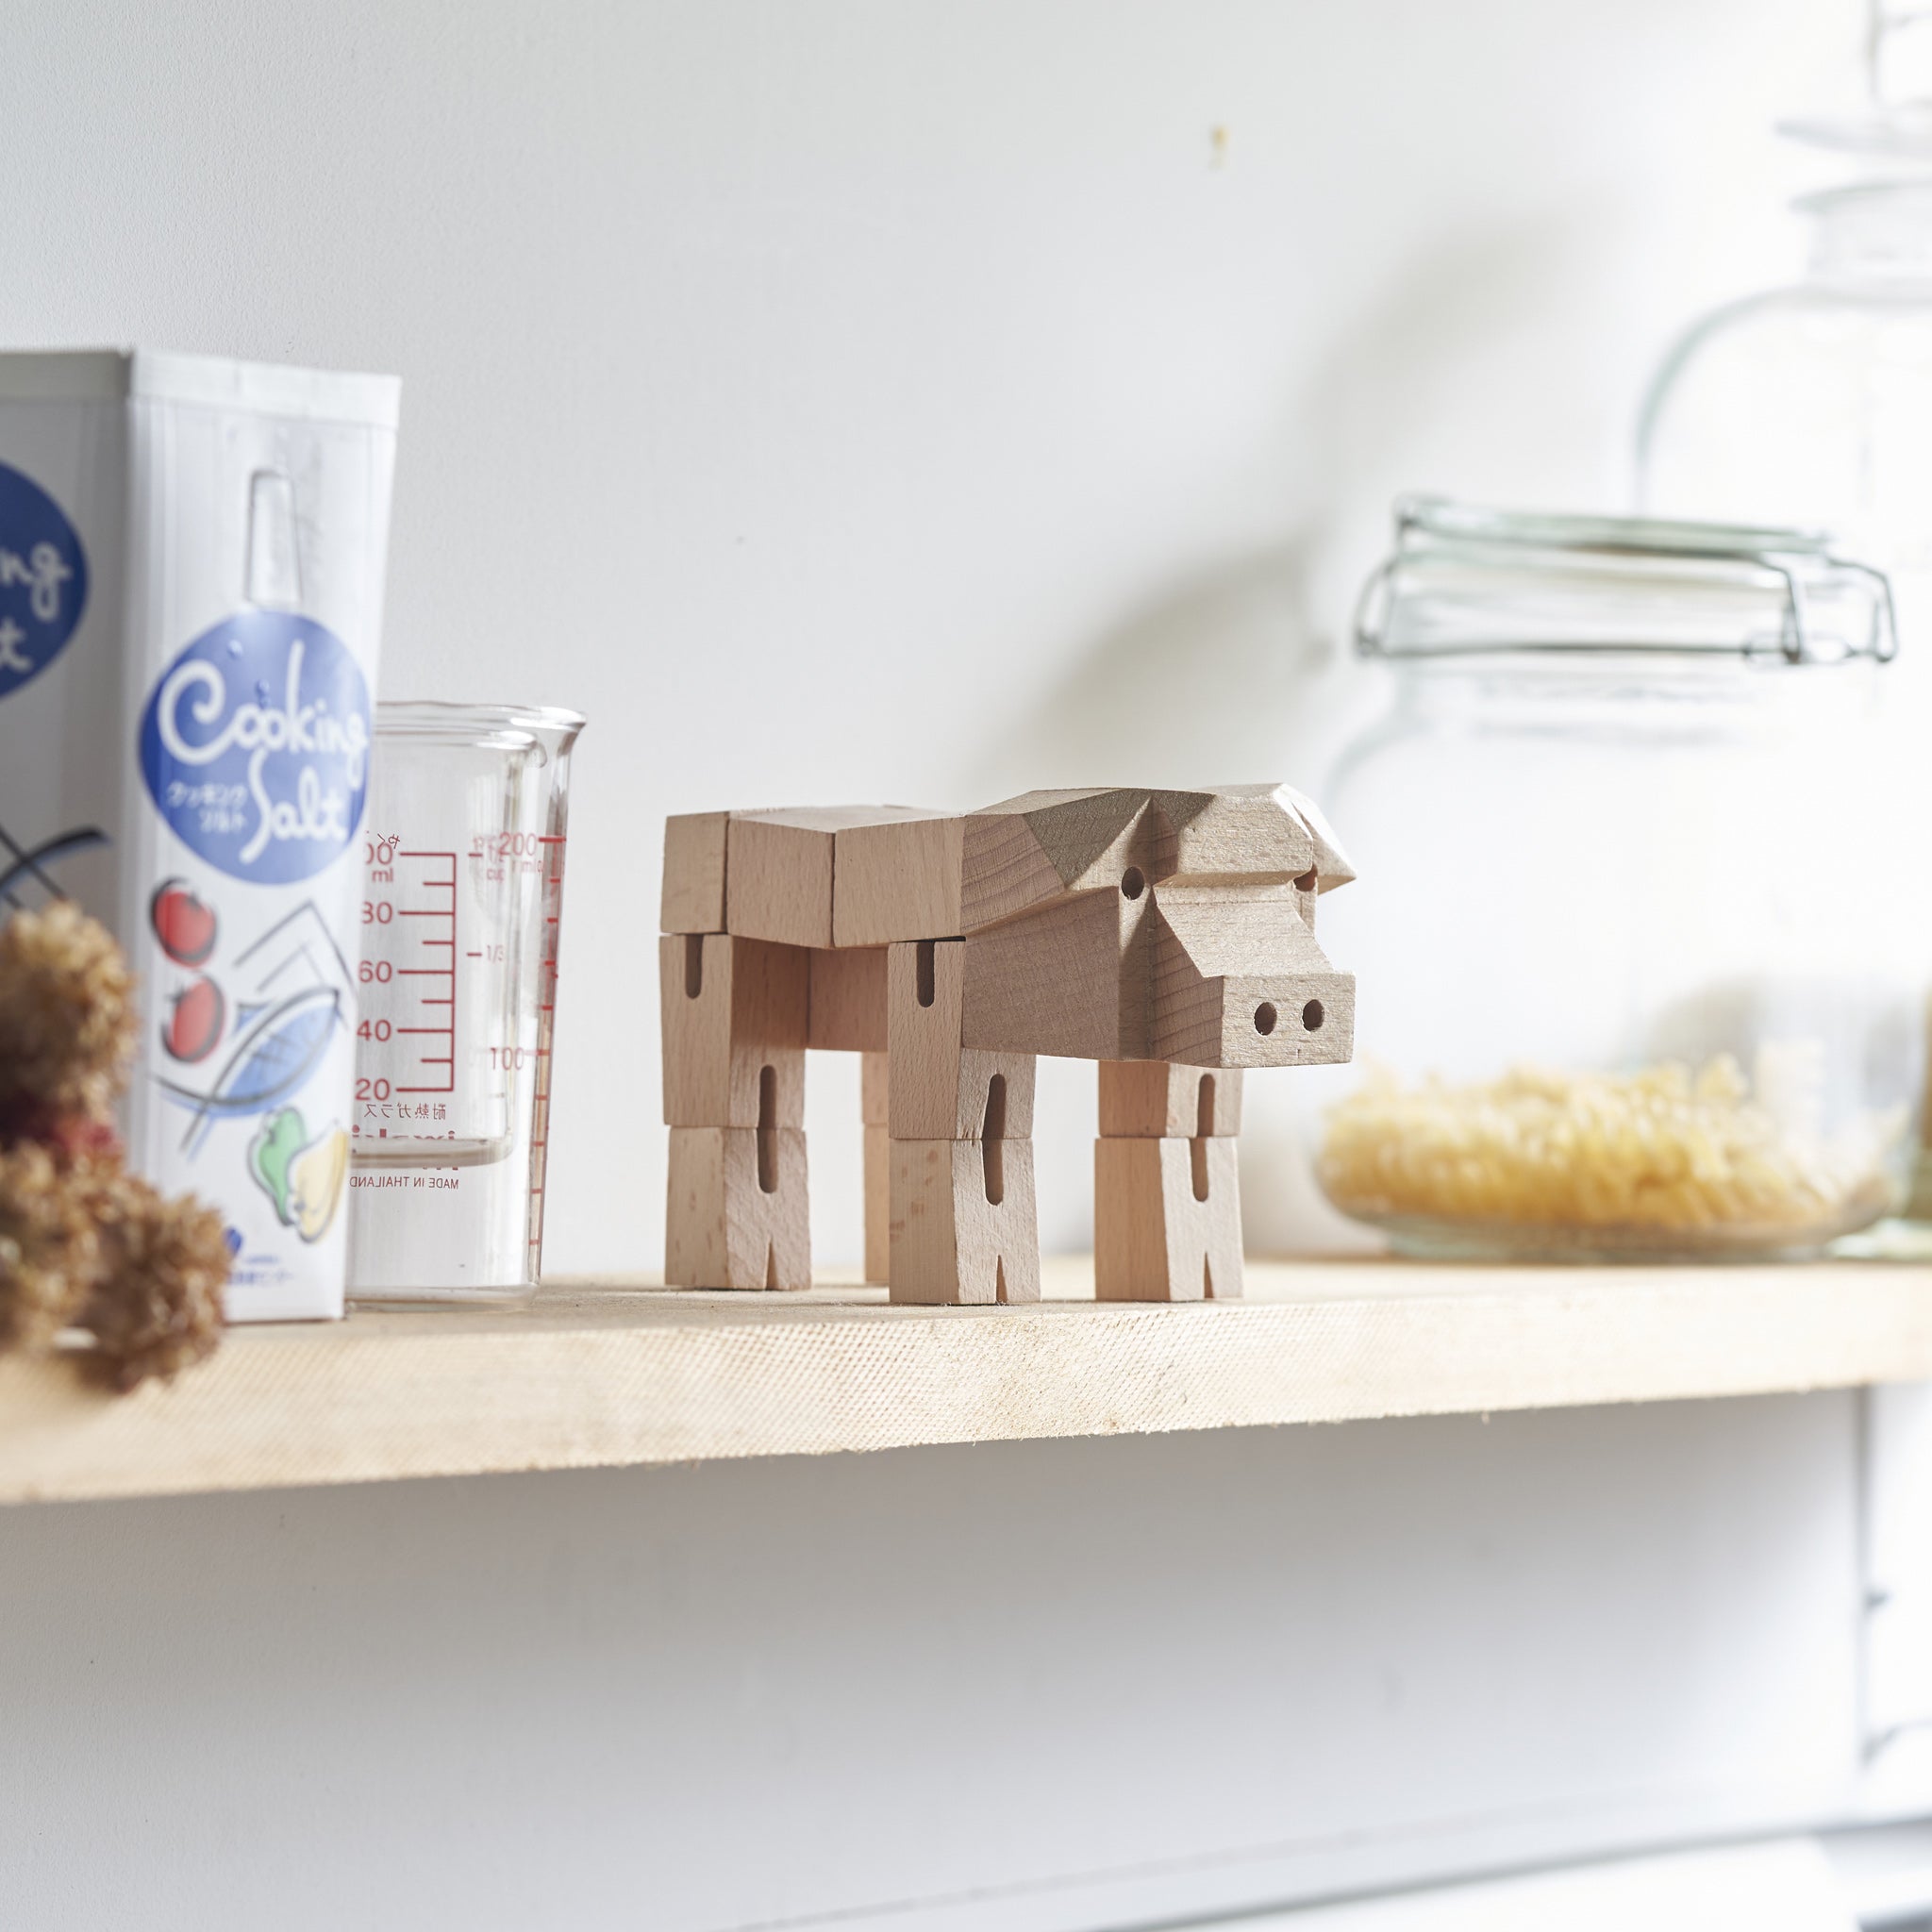 Morphits ® Pig Wooden Toy: Whimsical Wooden Playset Companions for Imaginative Minds - Yoshiaki Ito Design Stand N4